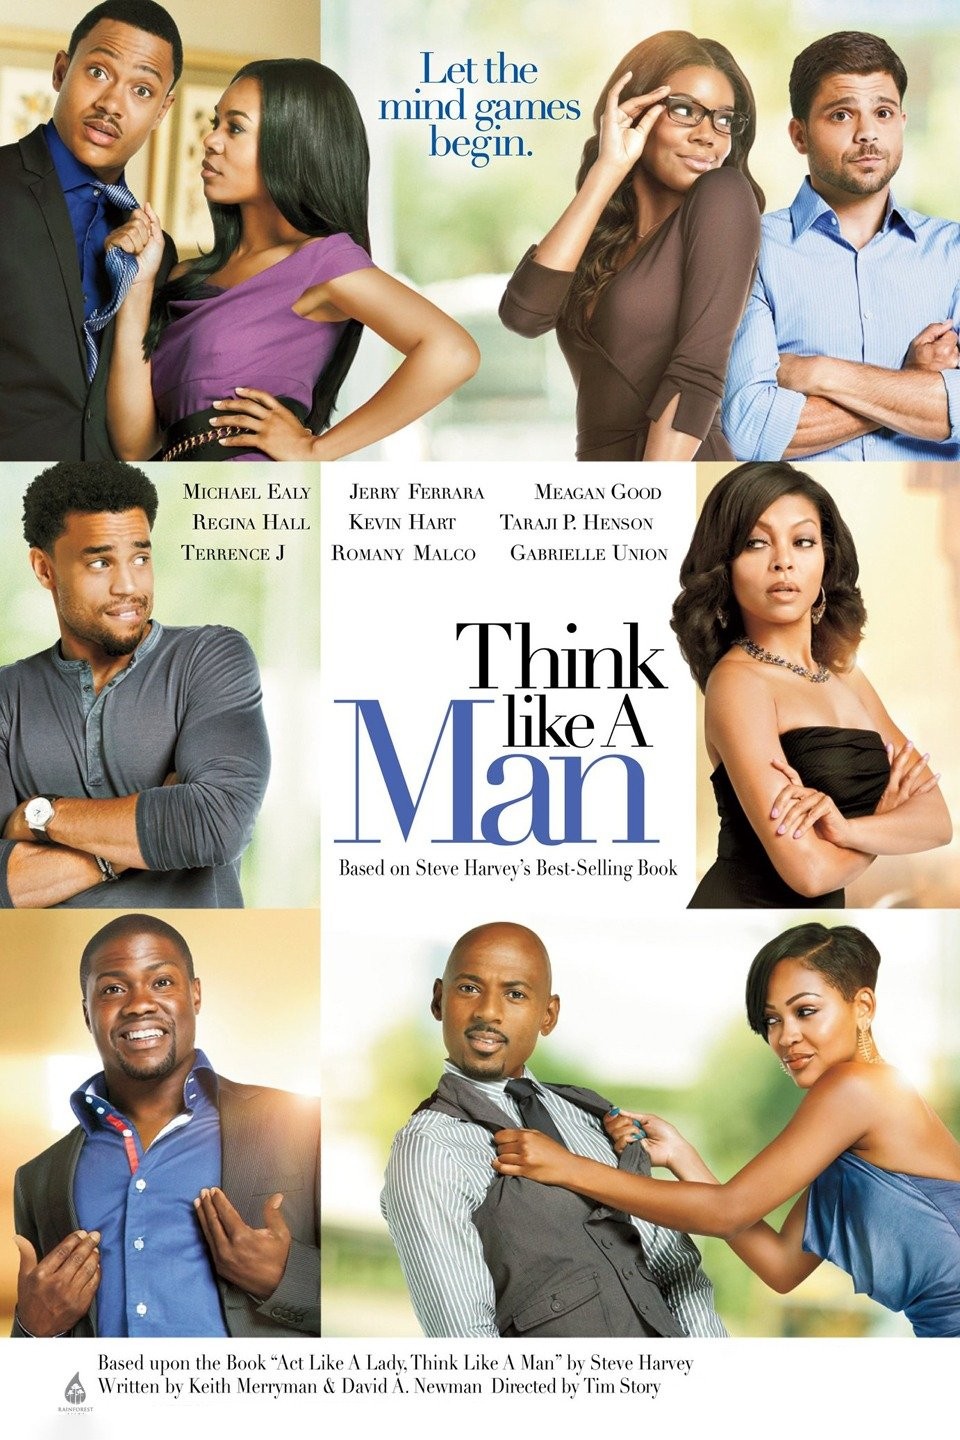 Think Like a Man' Brings Steve Harvey's Book to Life - The New York Times